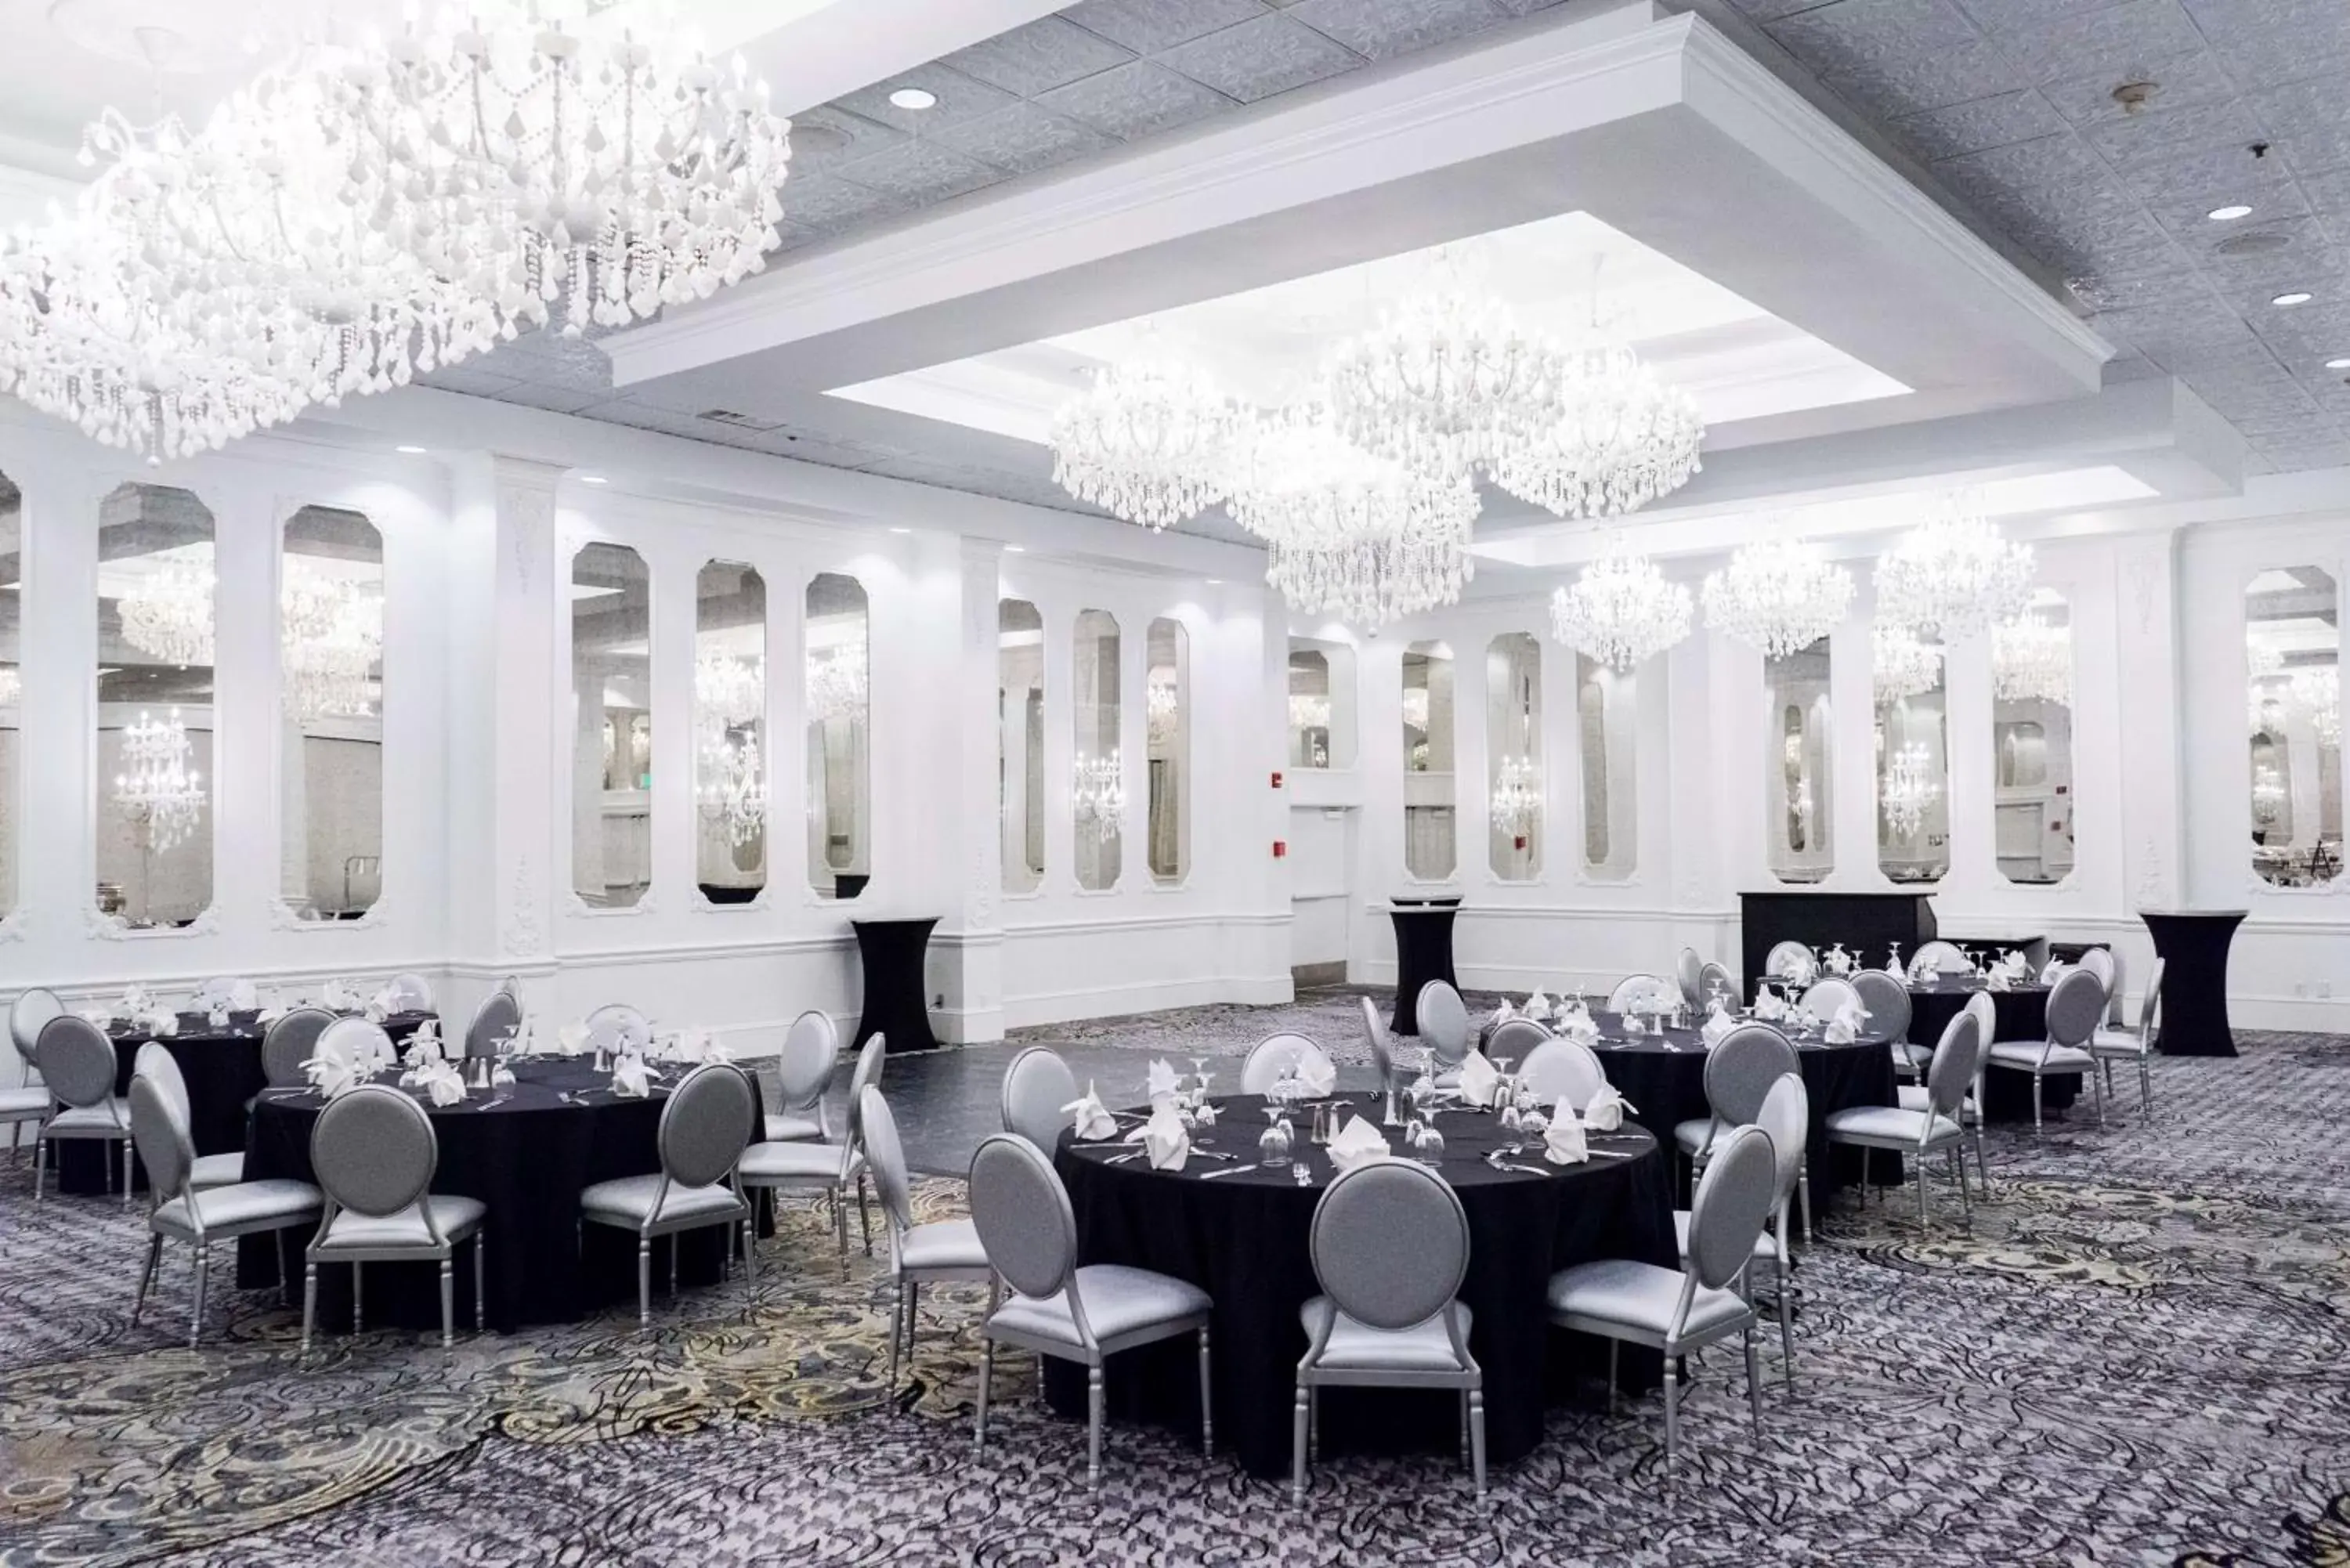 Meeting/conference room, Banquet Facilities in DoubleTree by Hilton Hotel Tallahassee